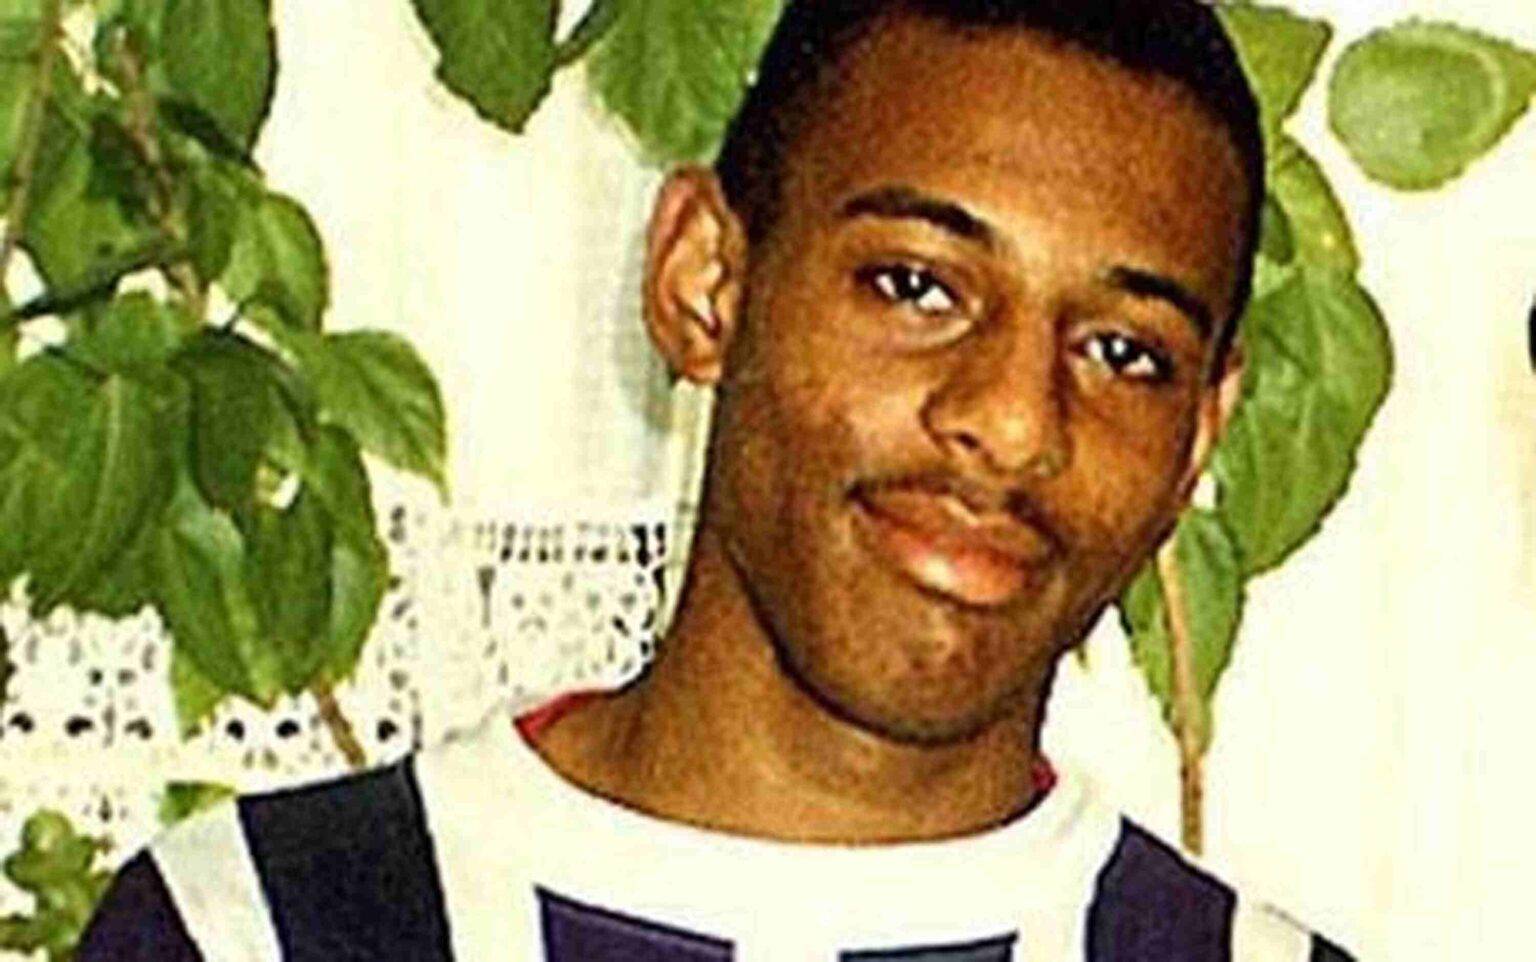 Stephen Lawrence: BBC names new suspect in UK’s most notorious racist murder